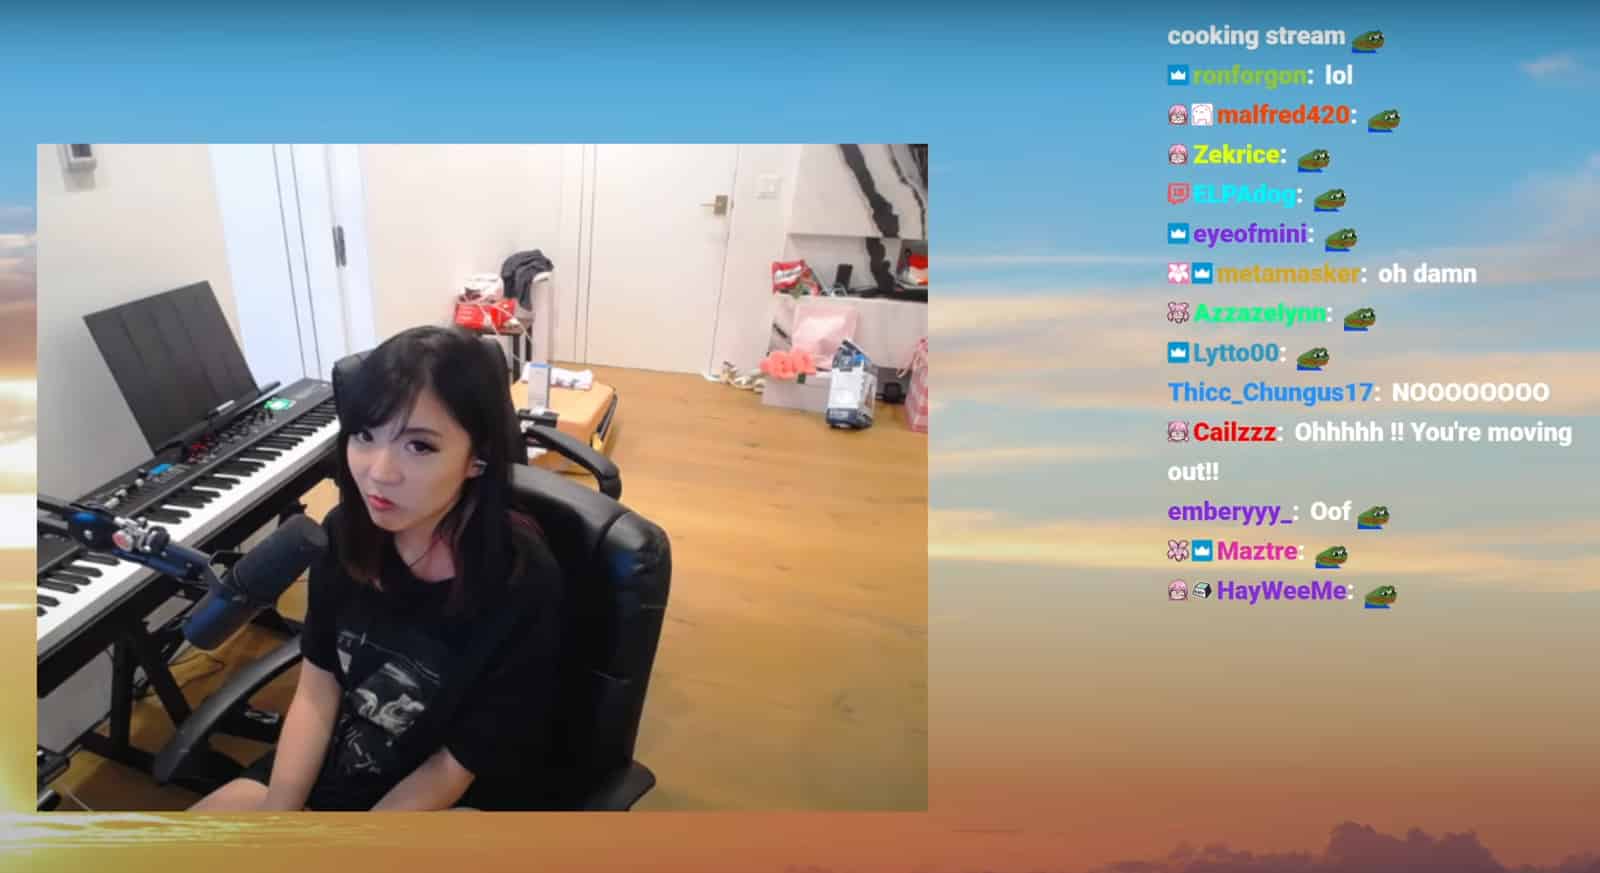 Twitch streamer LilyPichu reveals OfflineTV are moving out during broadcast screenshot